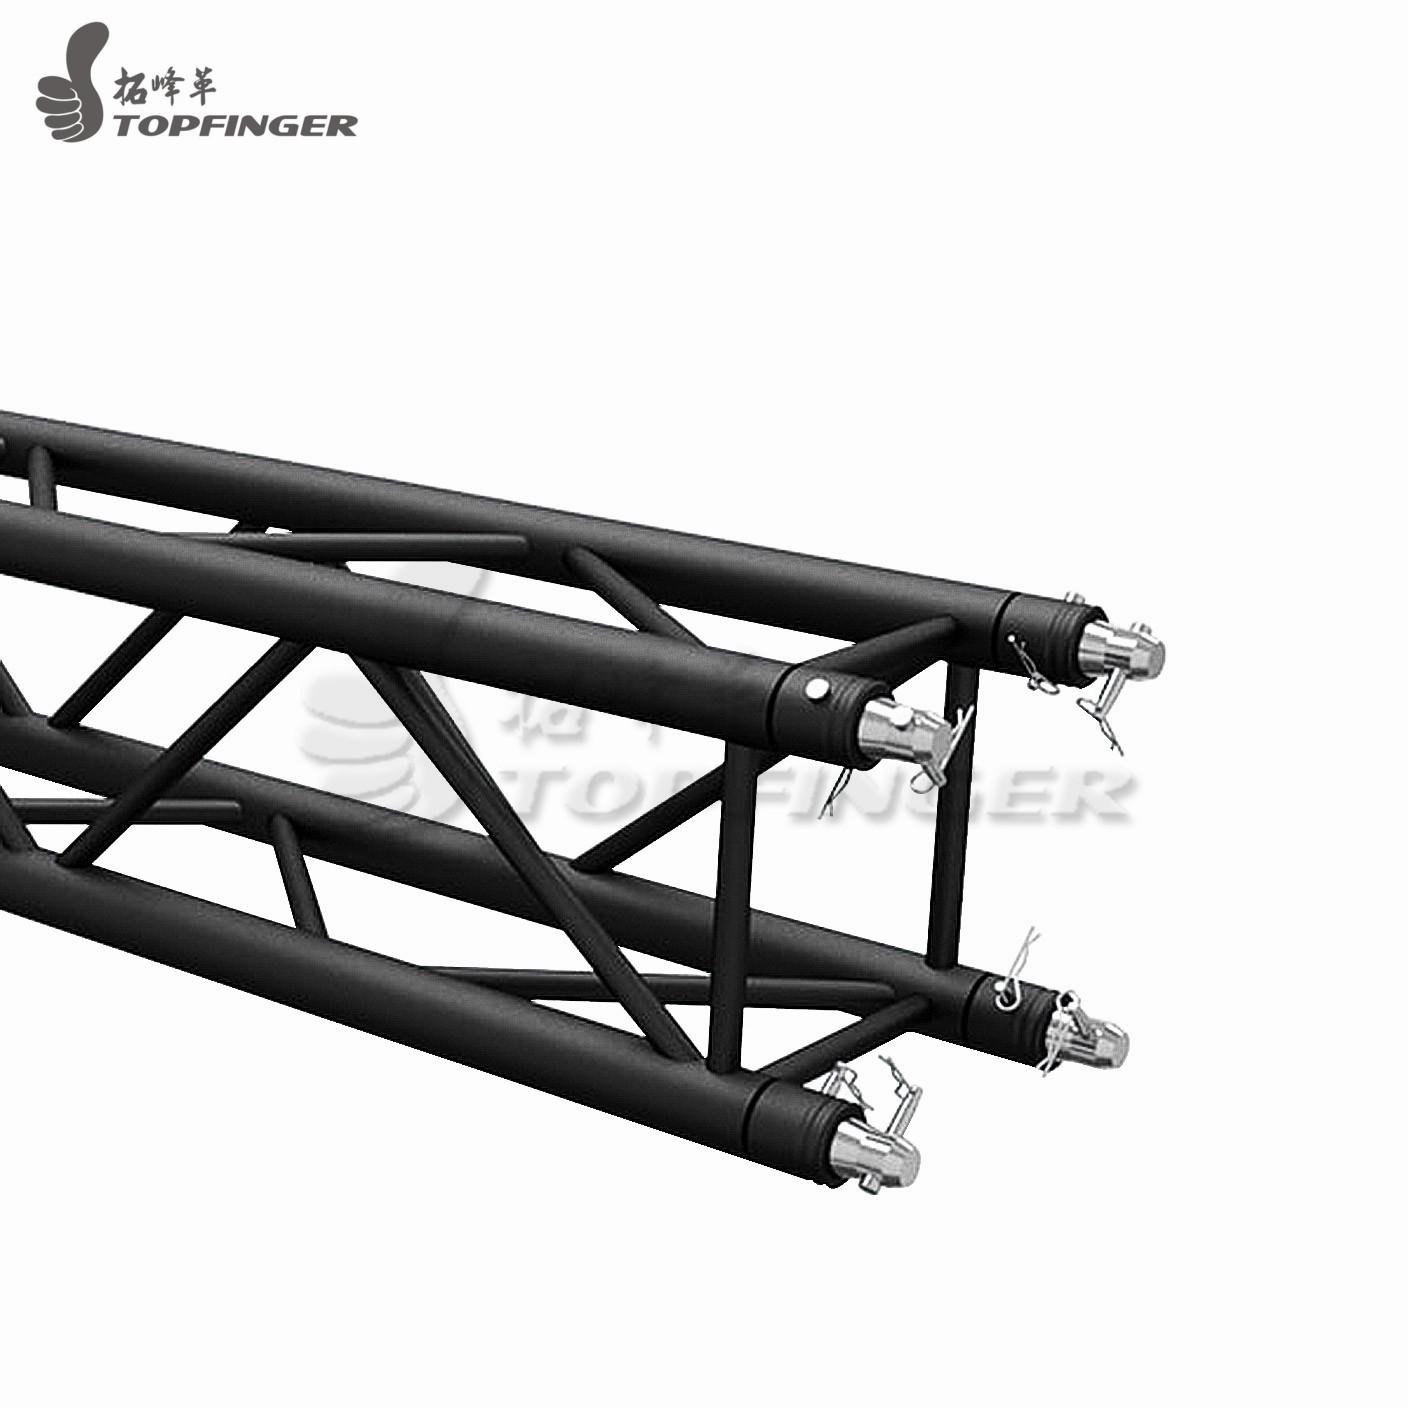 Peak roof flat roof truss system 450x450mmx1m curved lighting truss trade show t 2